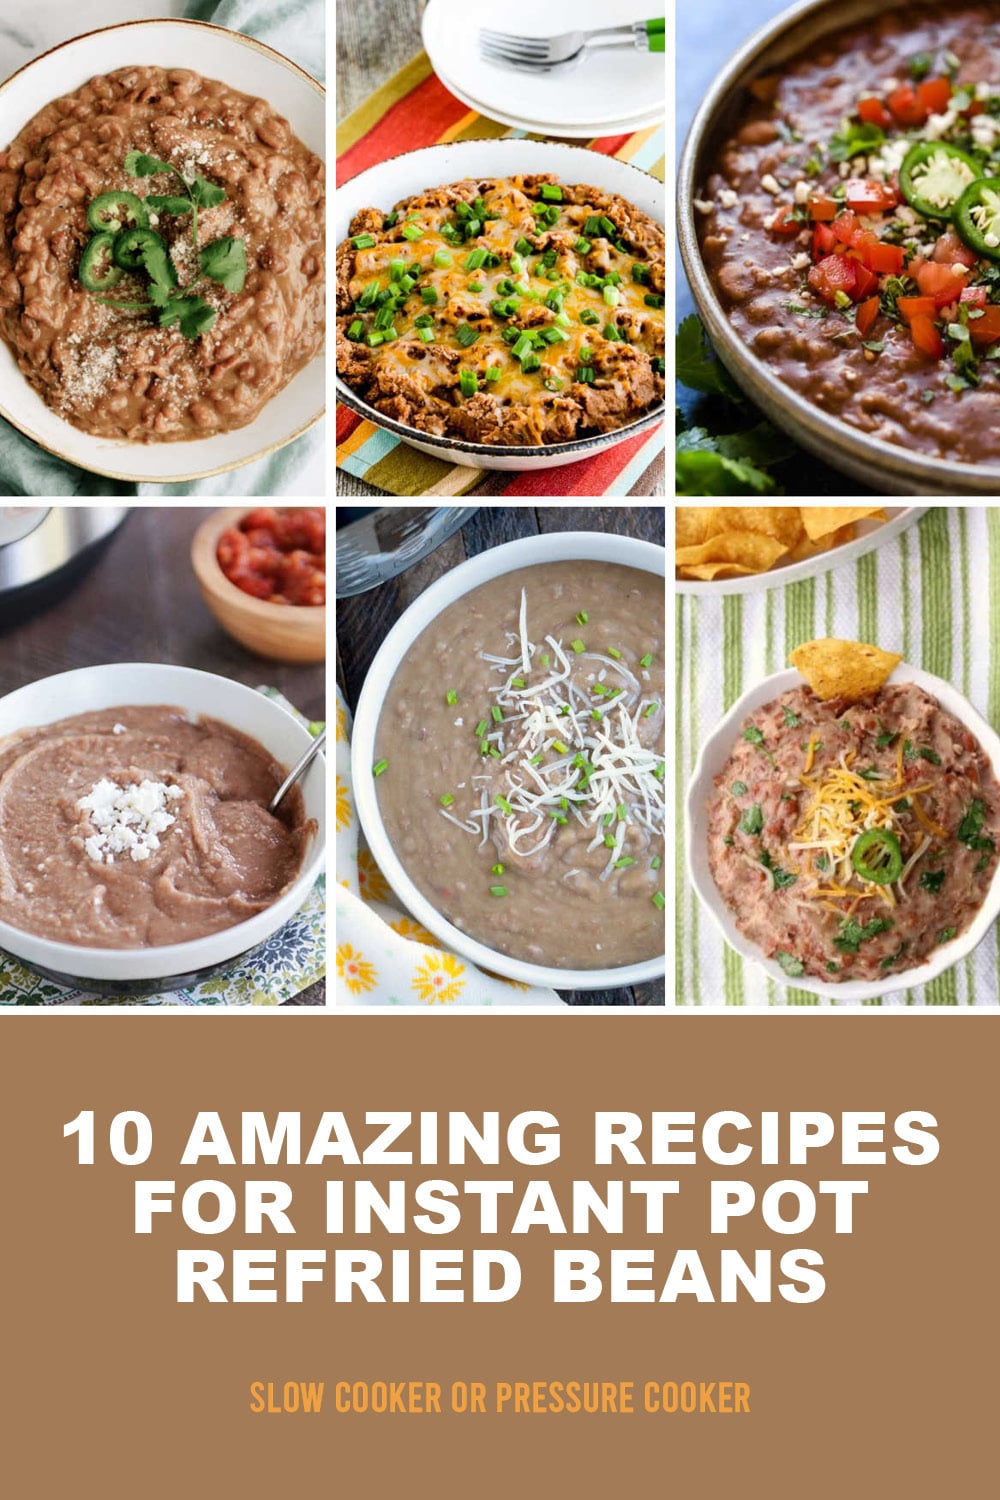 Pinterest image of 10 Amazing Recipes for Instant Pot Refried Beans